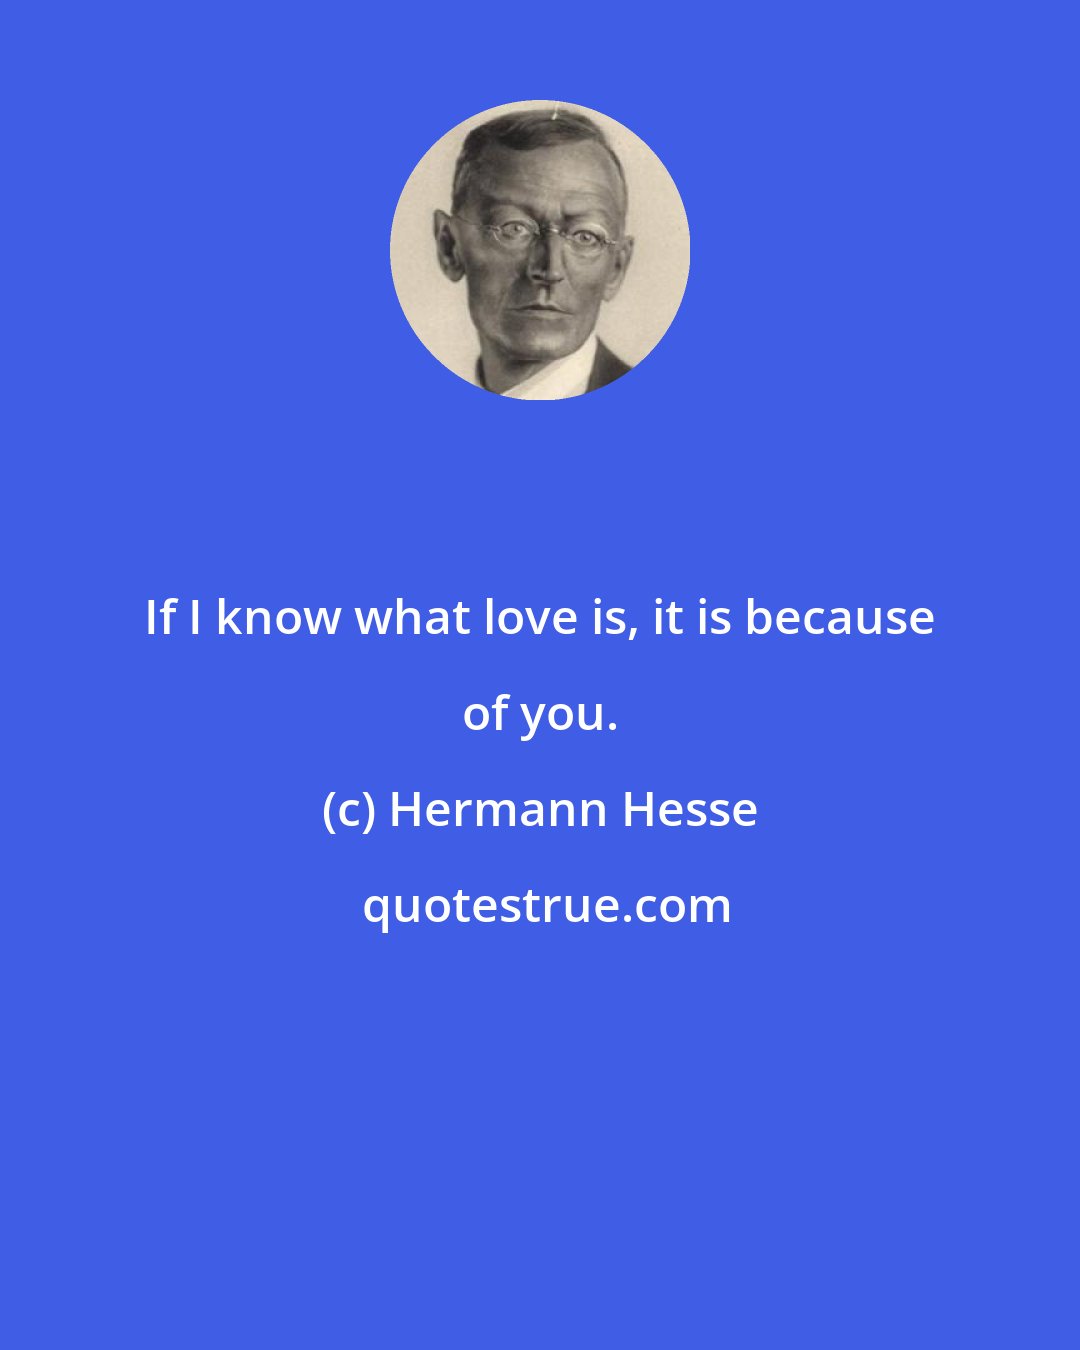 Hermann Hesse: If I know what love is, it is because of you.